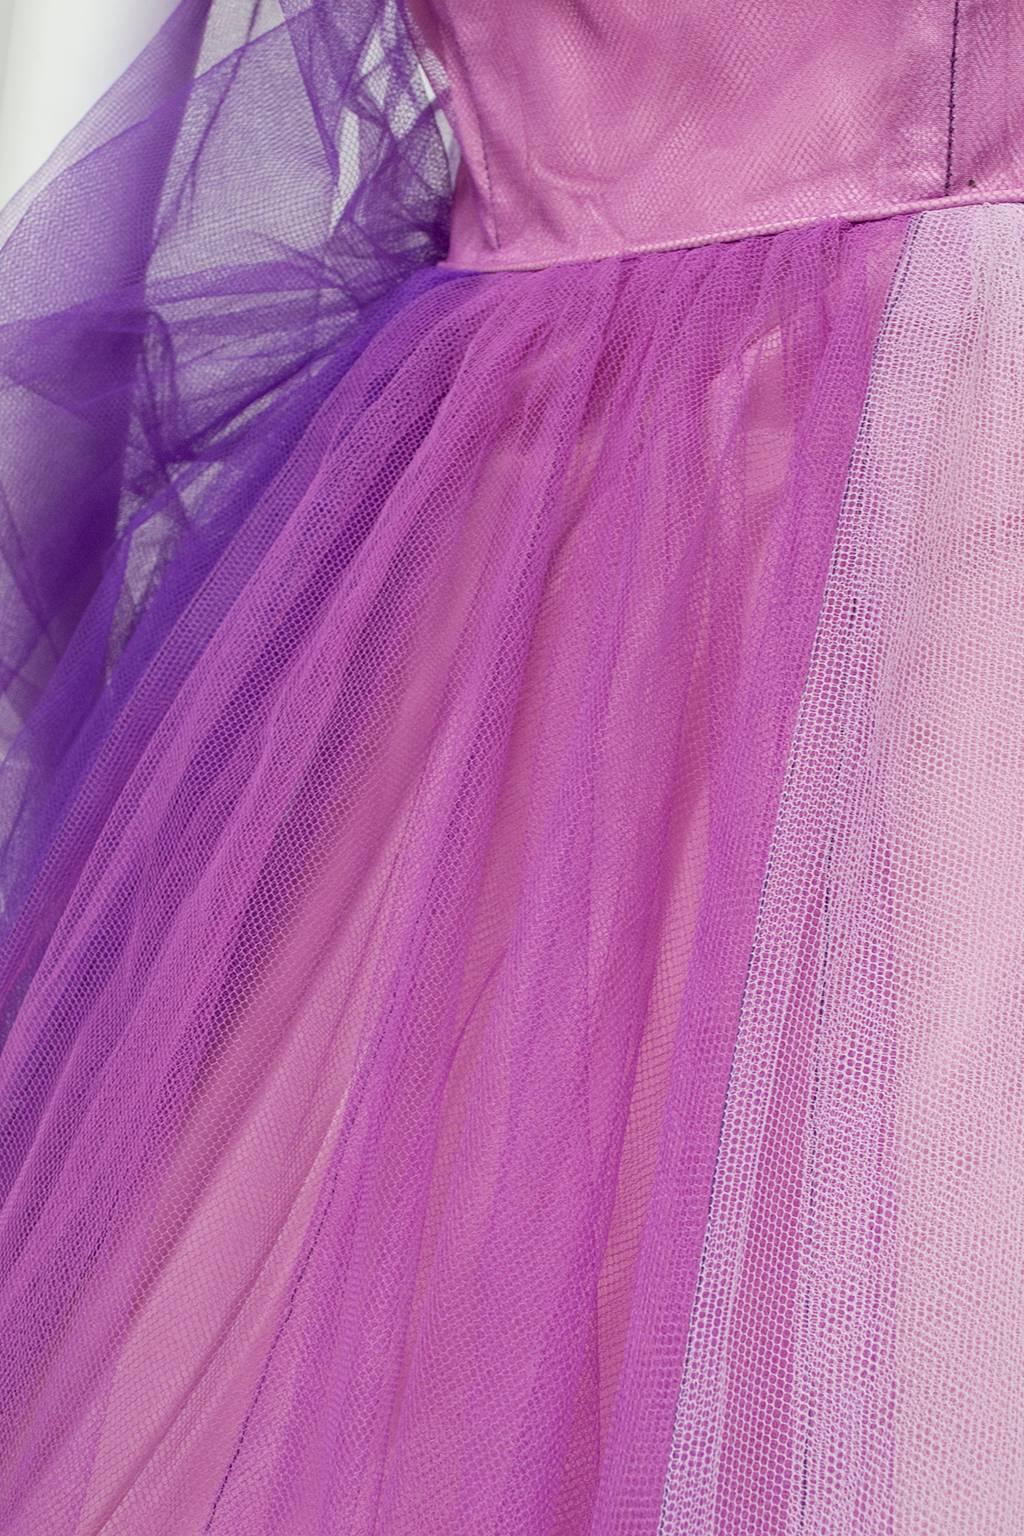 Emma Domb Violet Ombré Strapless Ball Gown, 1950s 6